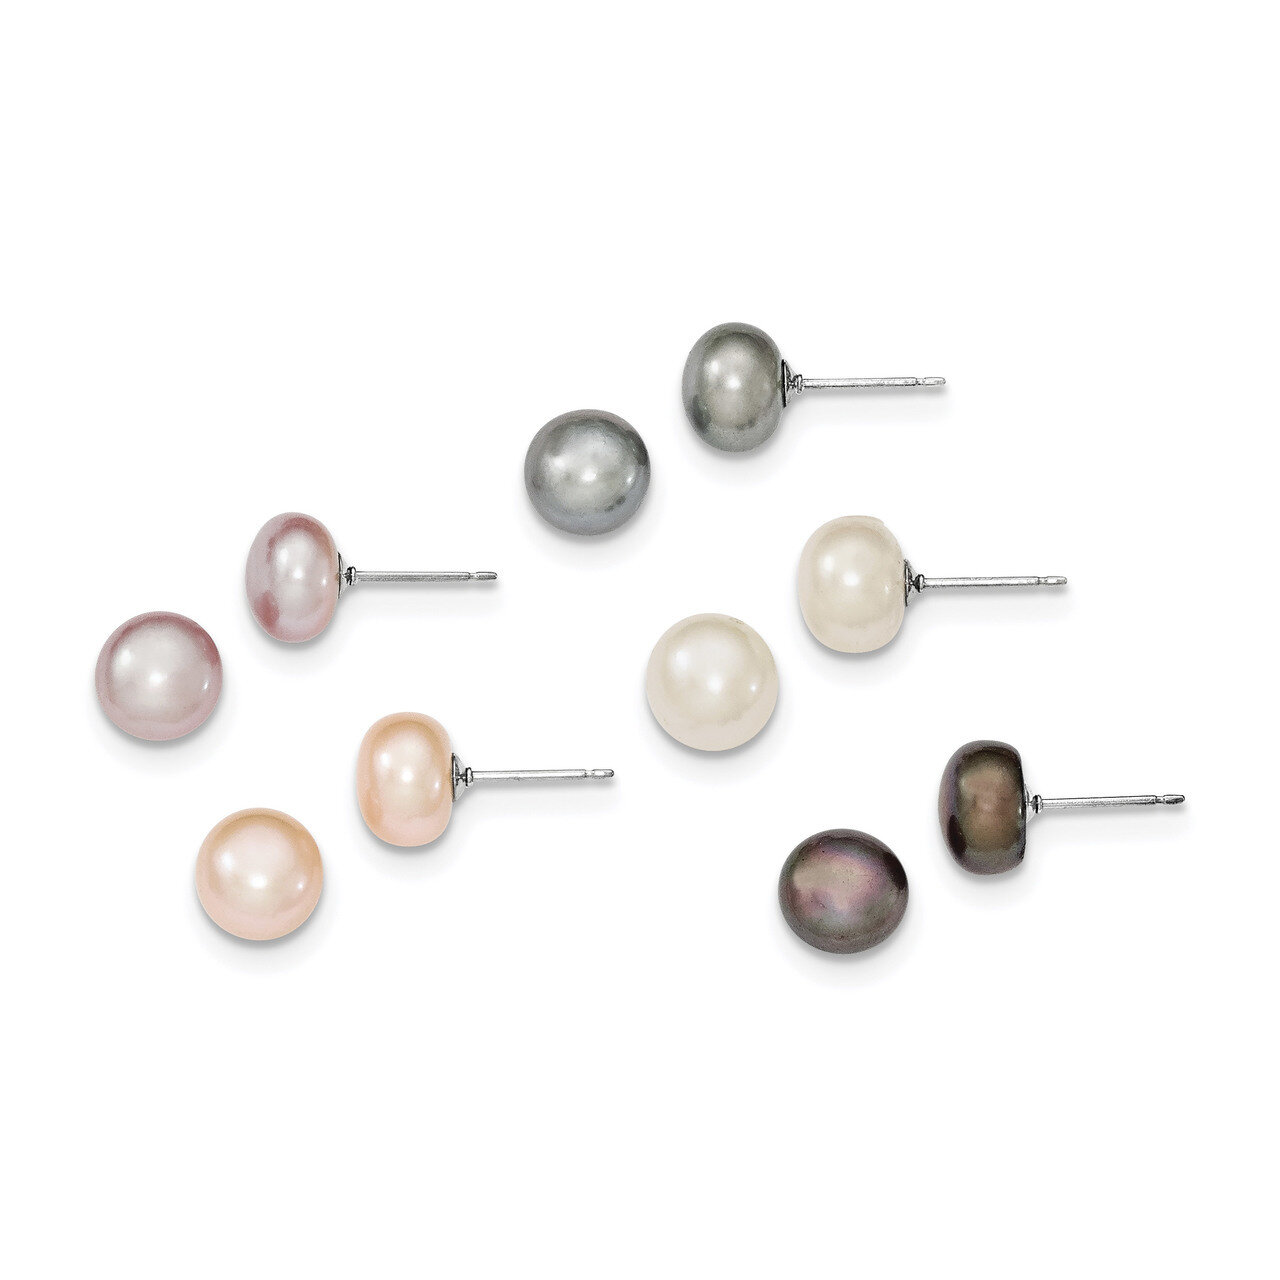 8-9mm Multi-Color Set of 5 Cultured Freshwater Pearl Button Studs Earrings Sterling Silver Rhodium QE12885SET